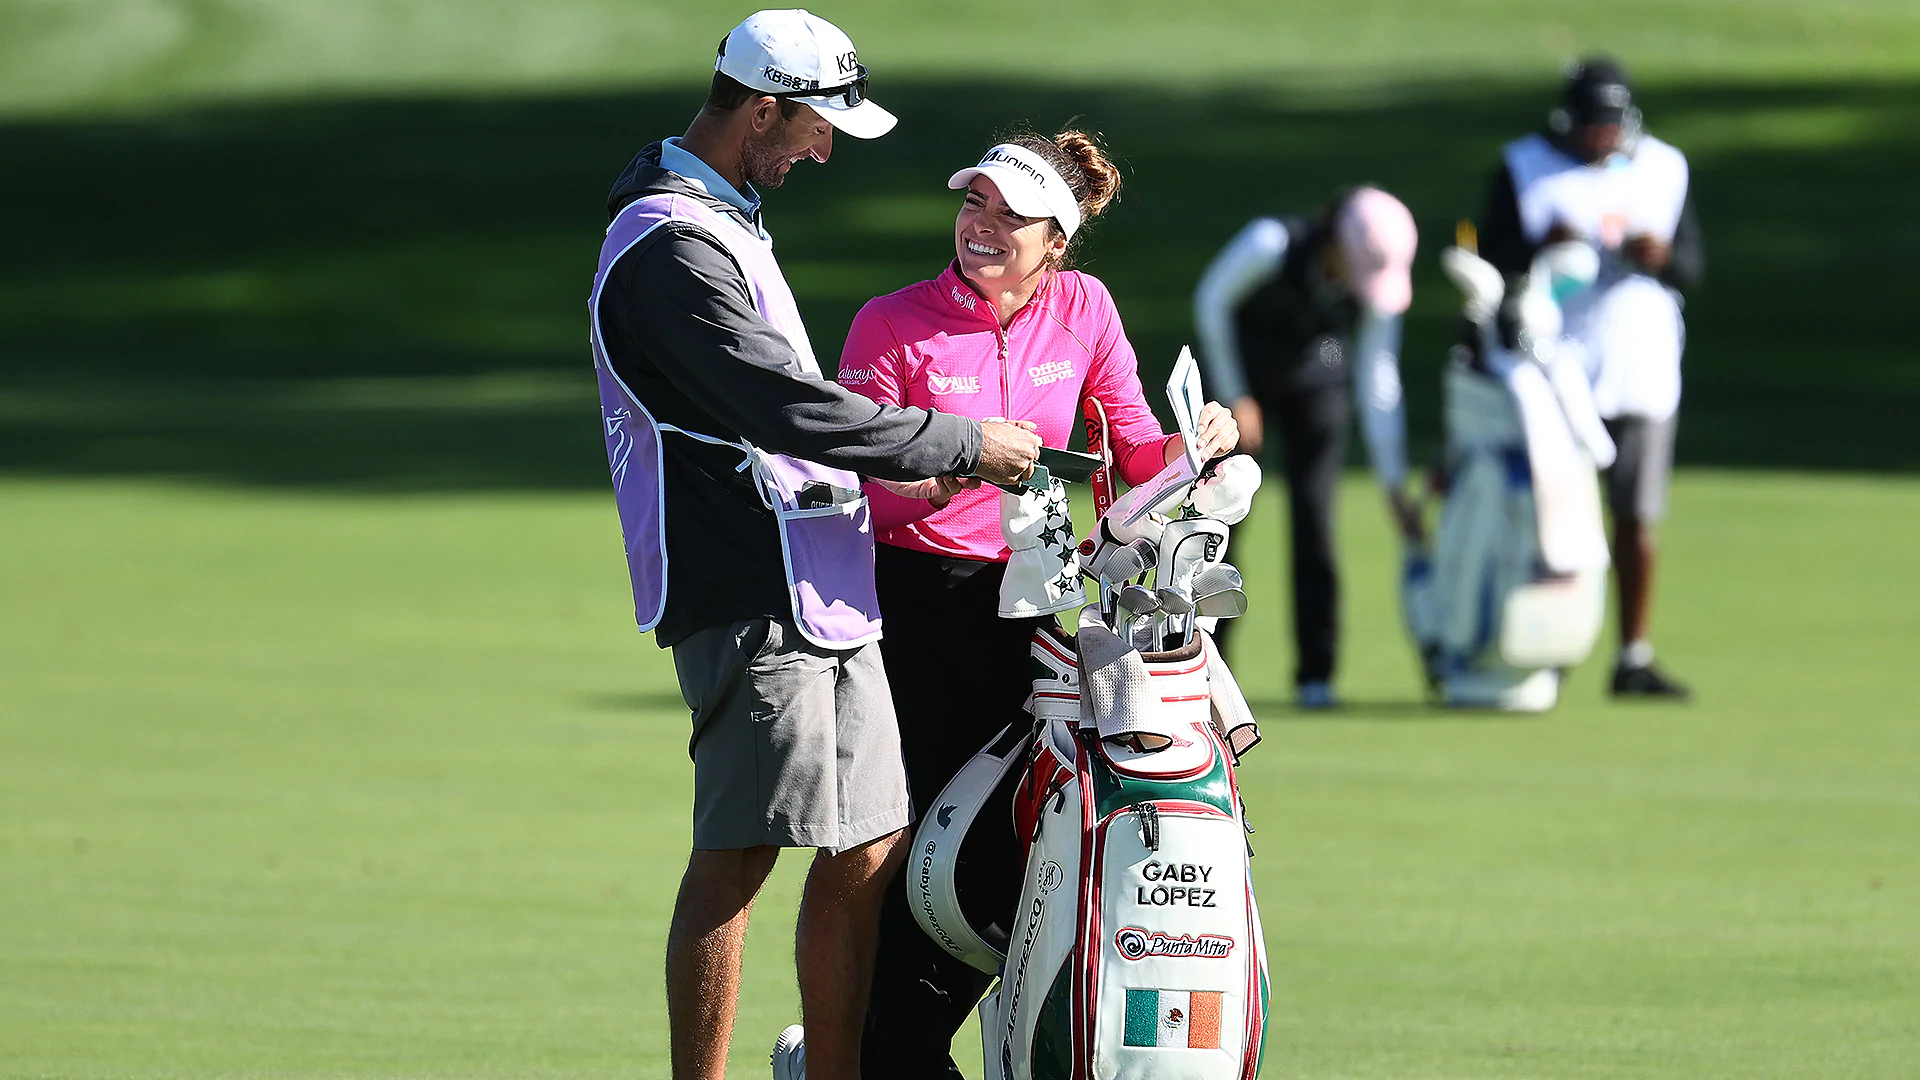 'Patient' Gaby Lopez plays way into early contention at KPMG Women's PGA 2